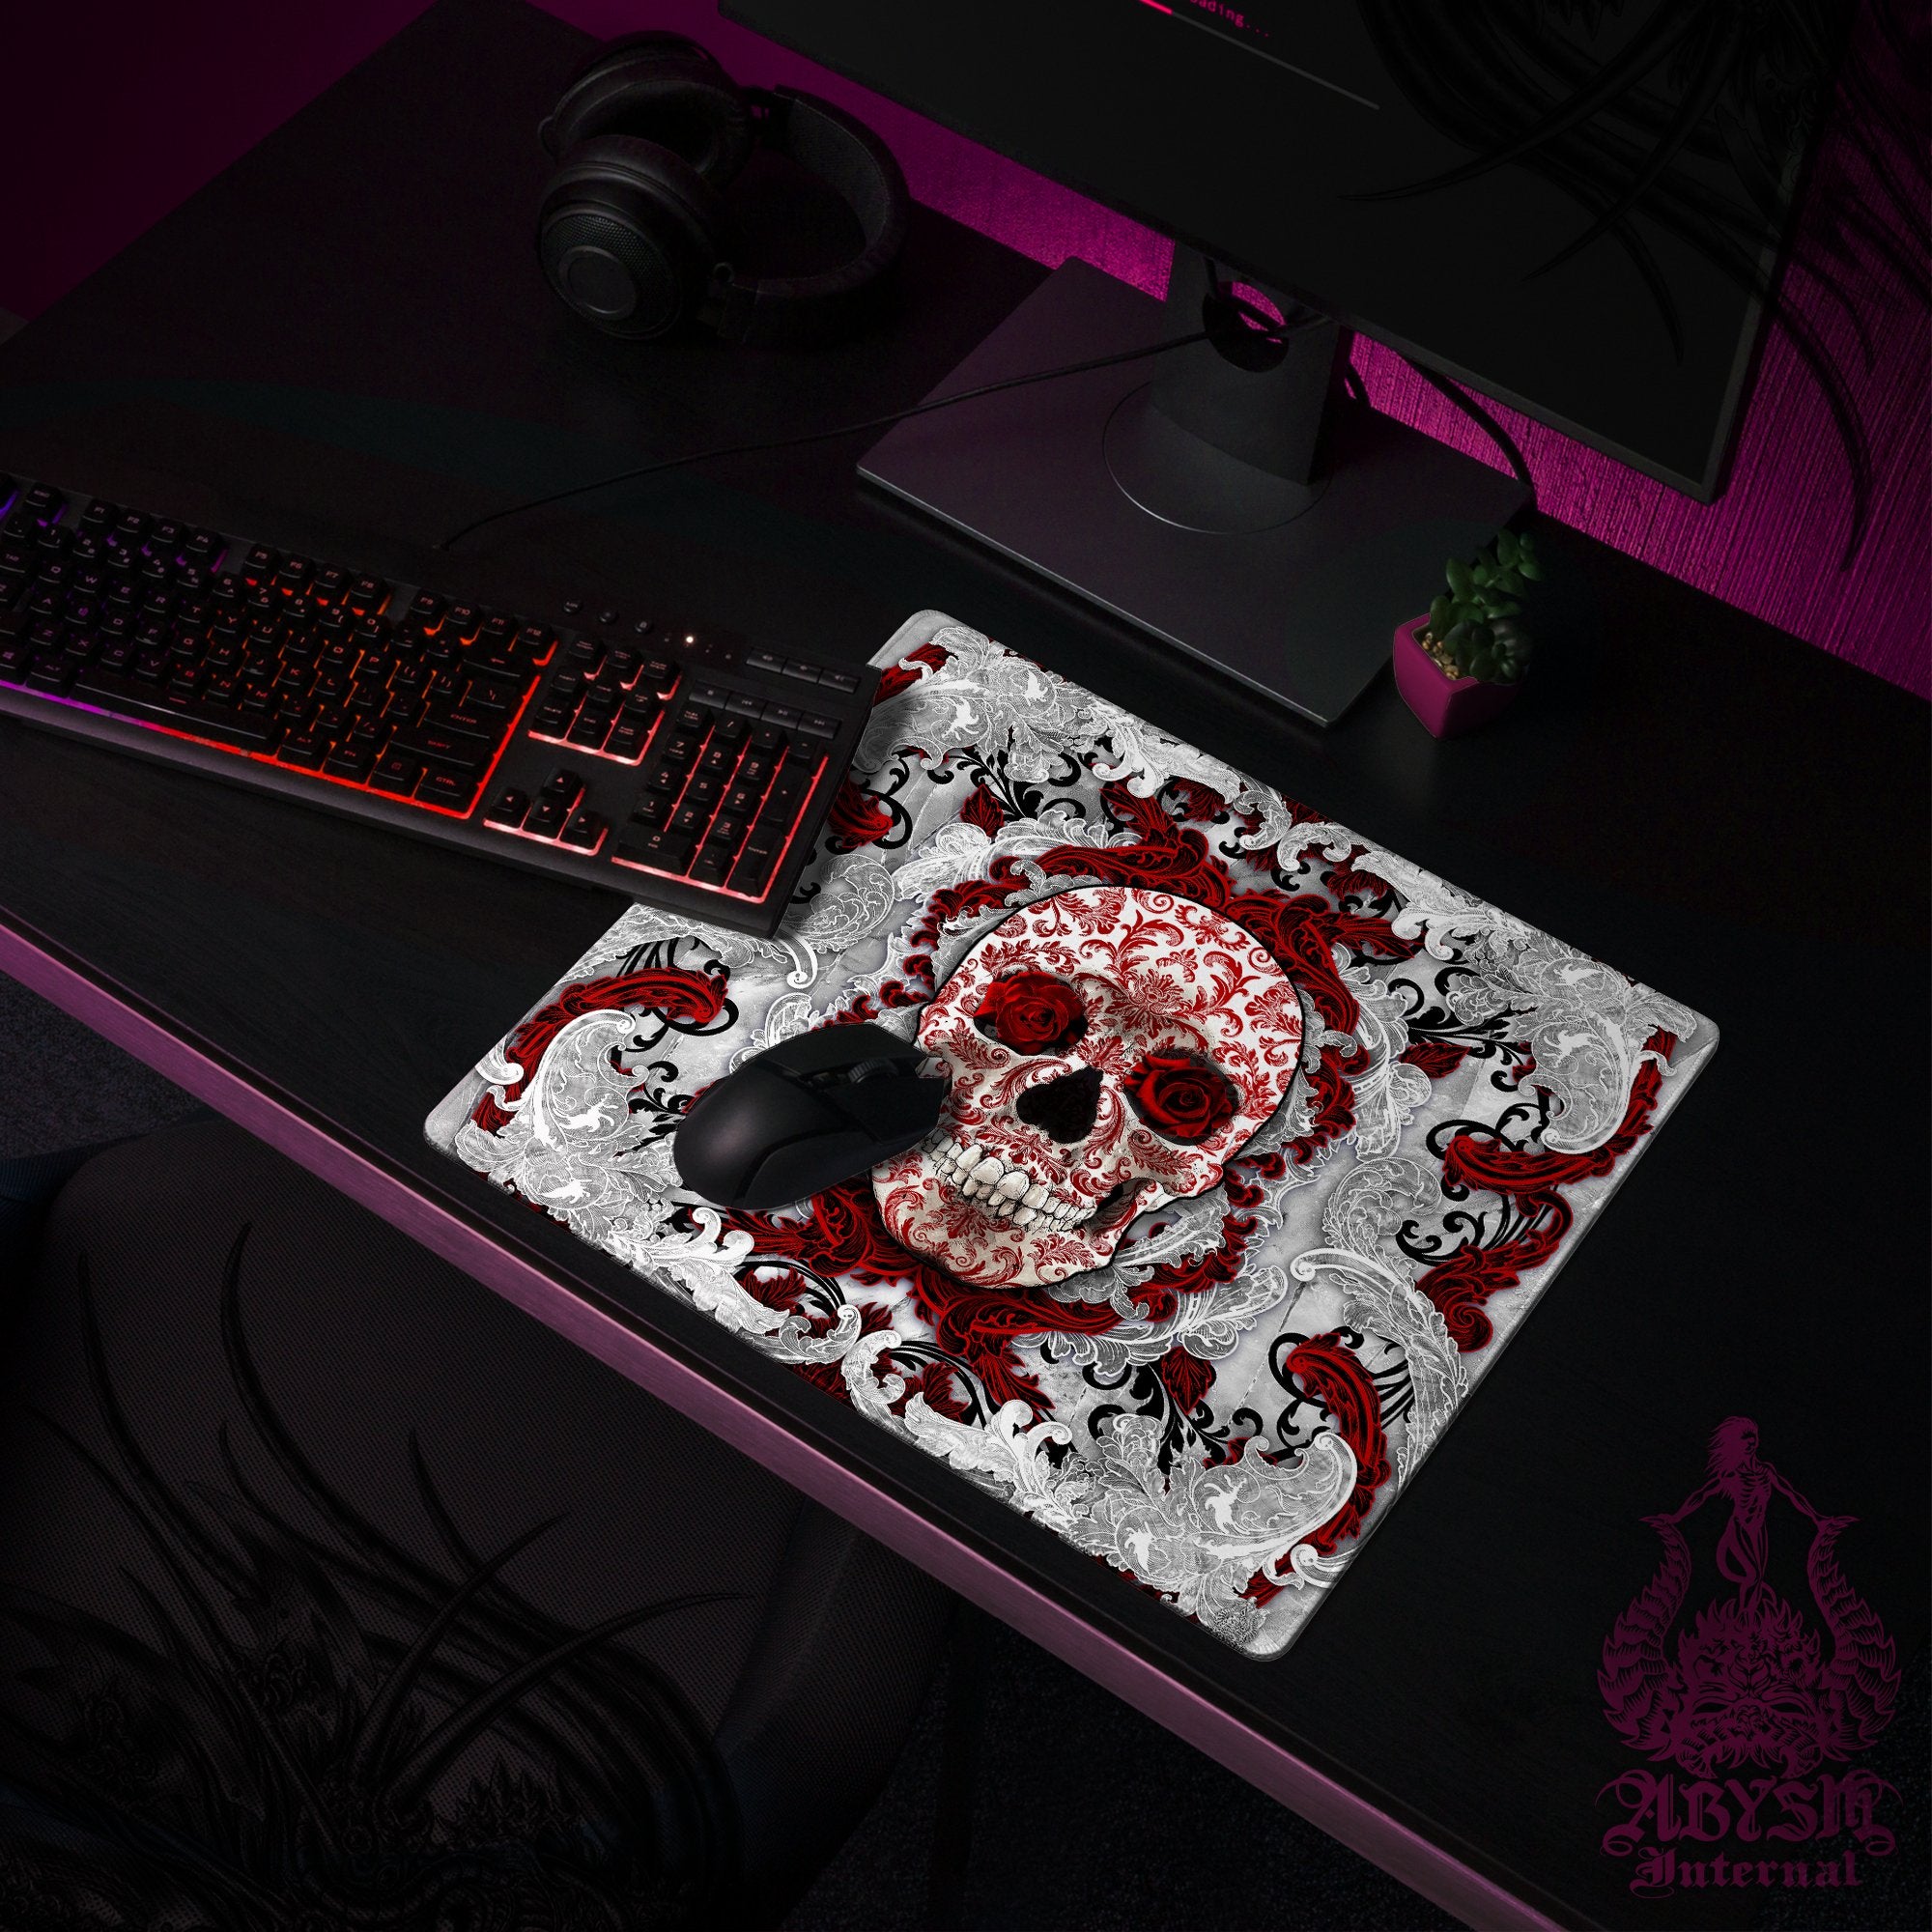 White Mouse Pad, Goth Gaming Desk Mat, Skull Workpad, Bloody Table Protector Cover, Art Print - Abysm Internal